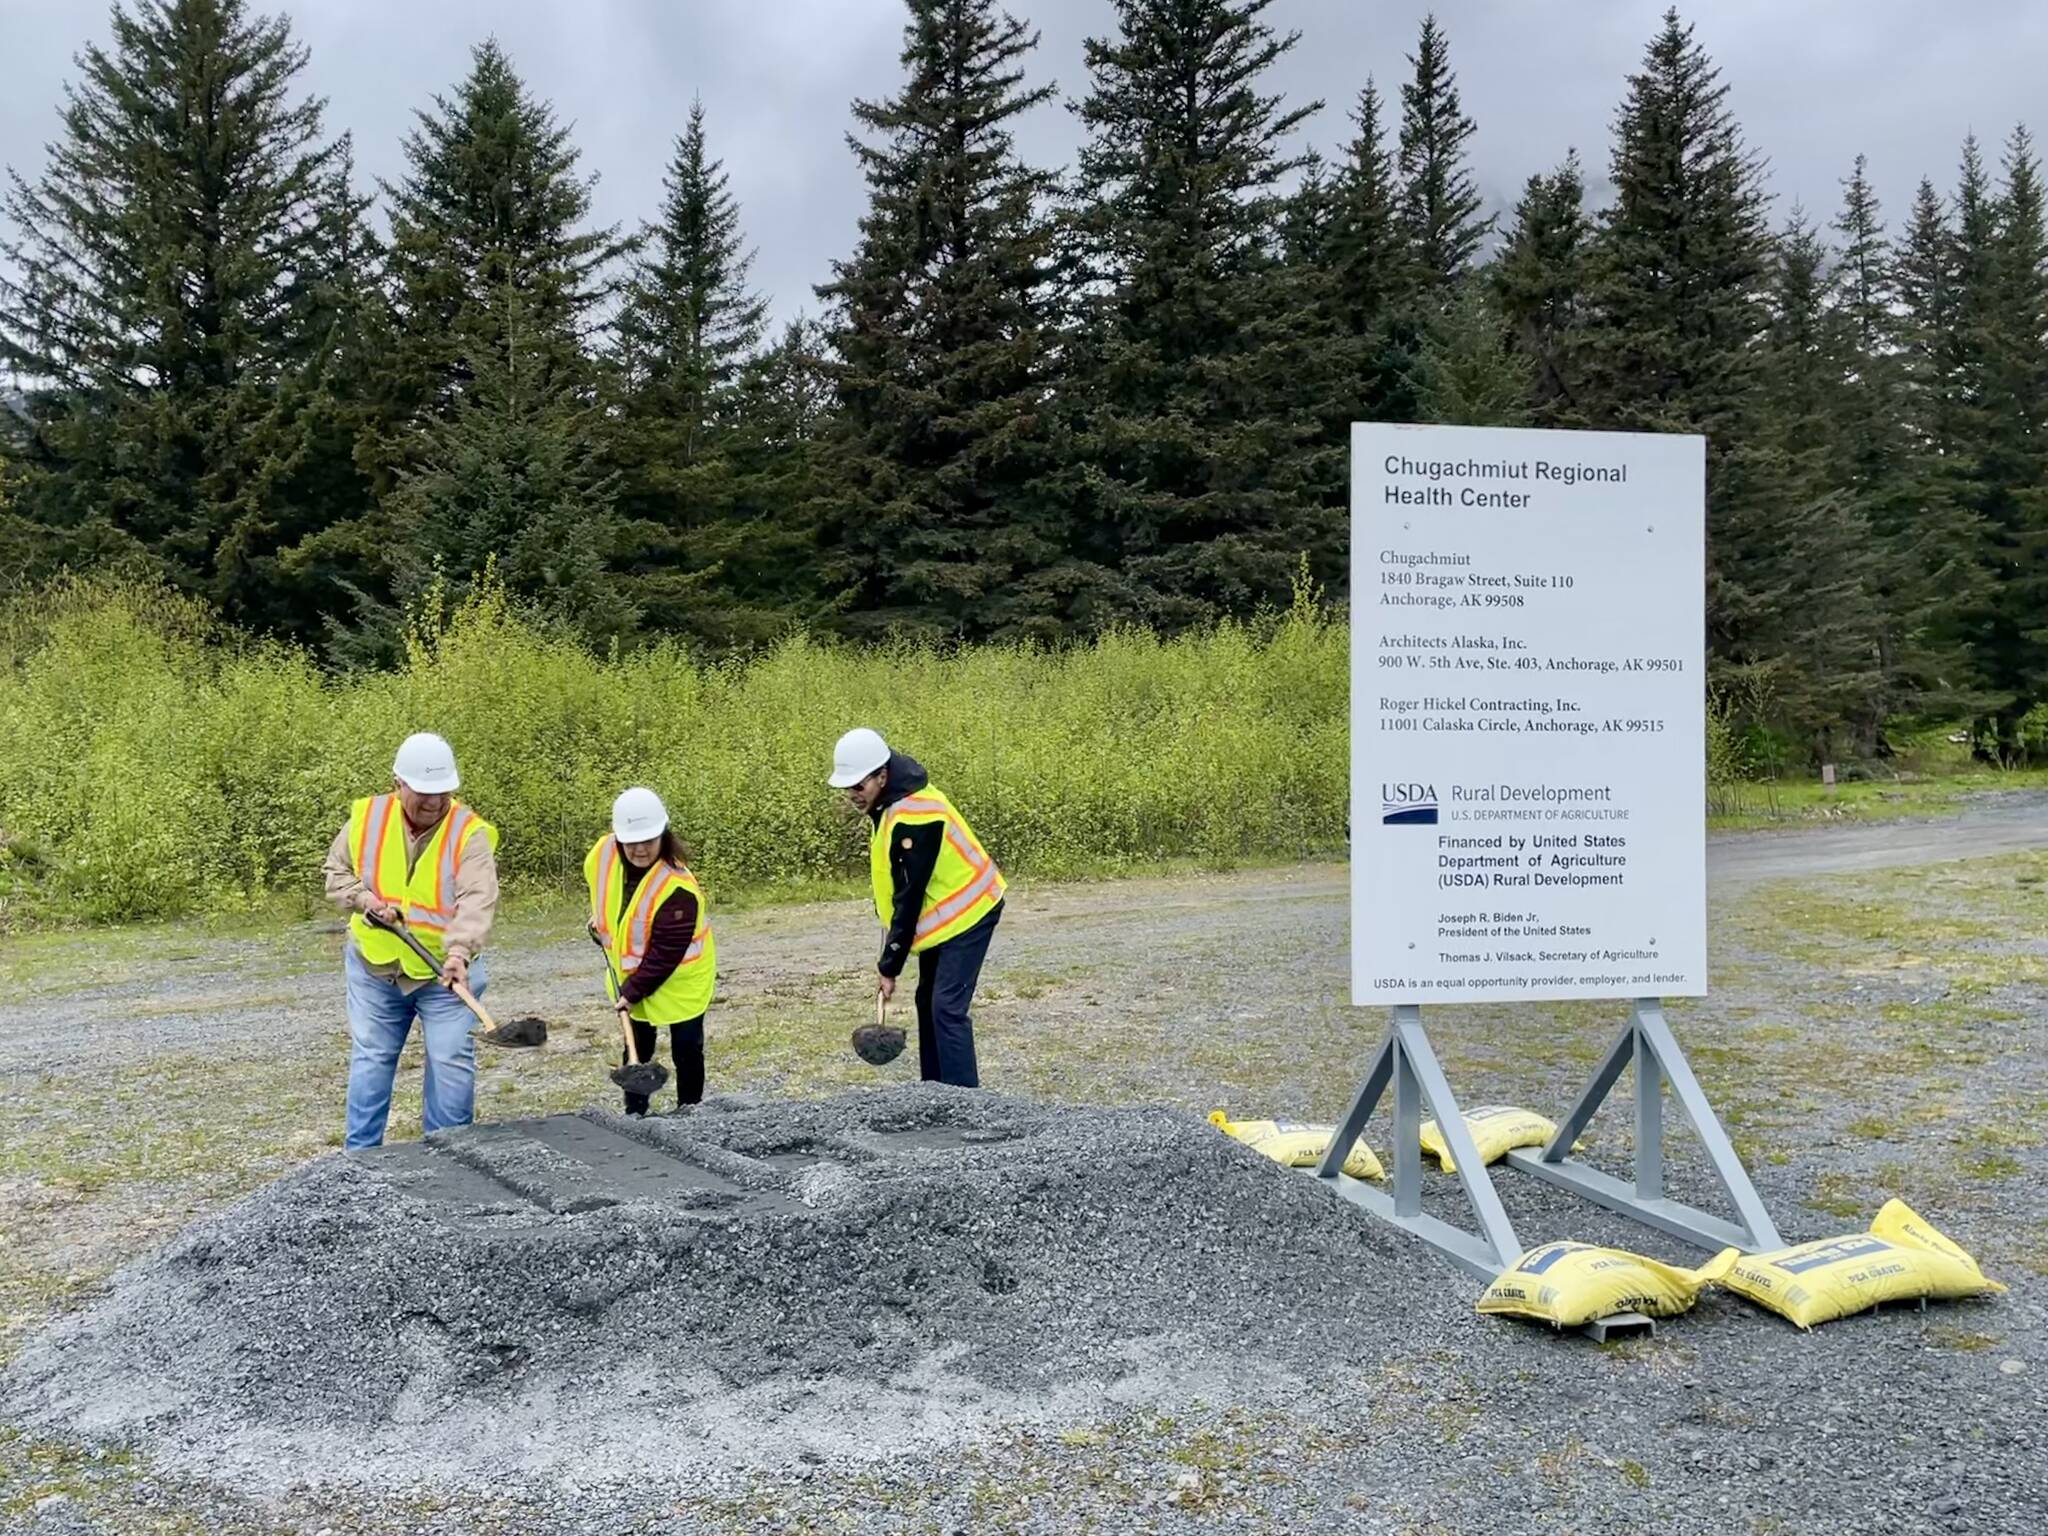 Chugachmiut Board Vice Chair Larry Evanoff from Chenega, Chair Fran Norman from Port Graham, and Director Arne Hatch from Qutekcak broke ground for the Chugachmiut Regional Health Center in Seward, Alaska, Saturday, June 3. The occasion marked the start of construction of the $20 million facility. The 15,475 square foot Tribally owned and operated health clinic will serve as a regional hub providing medical, dental, and behavioral health services for Alaskans in seven Tribal communities. (Photo provided by United States Department of Agriculture Rural Development)